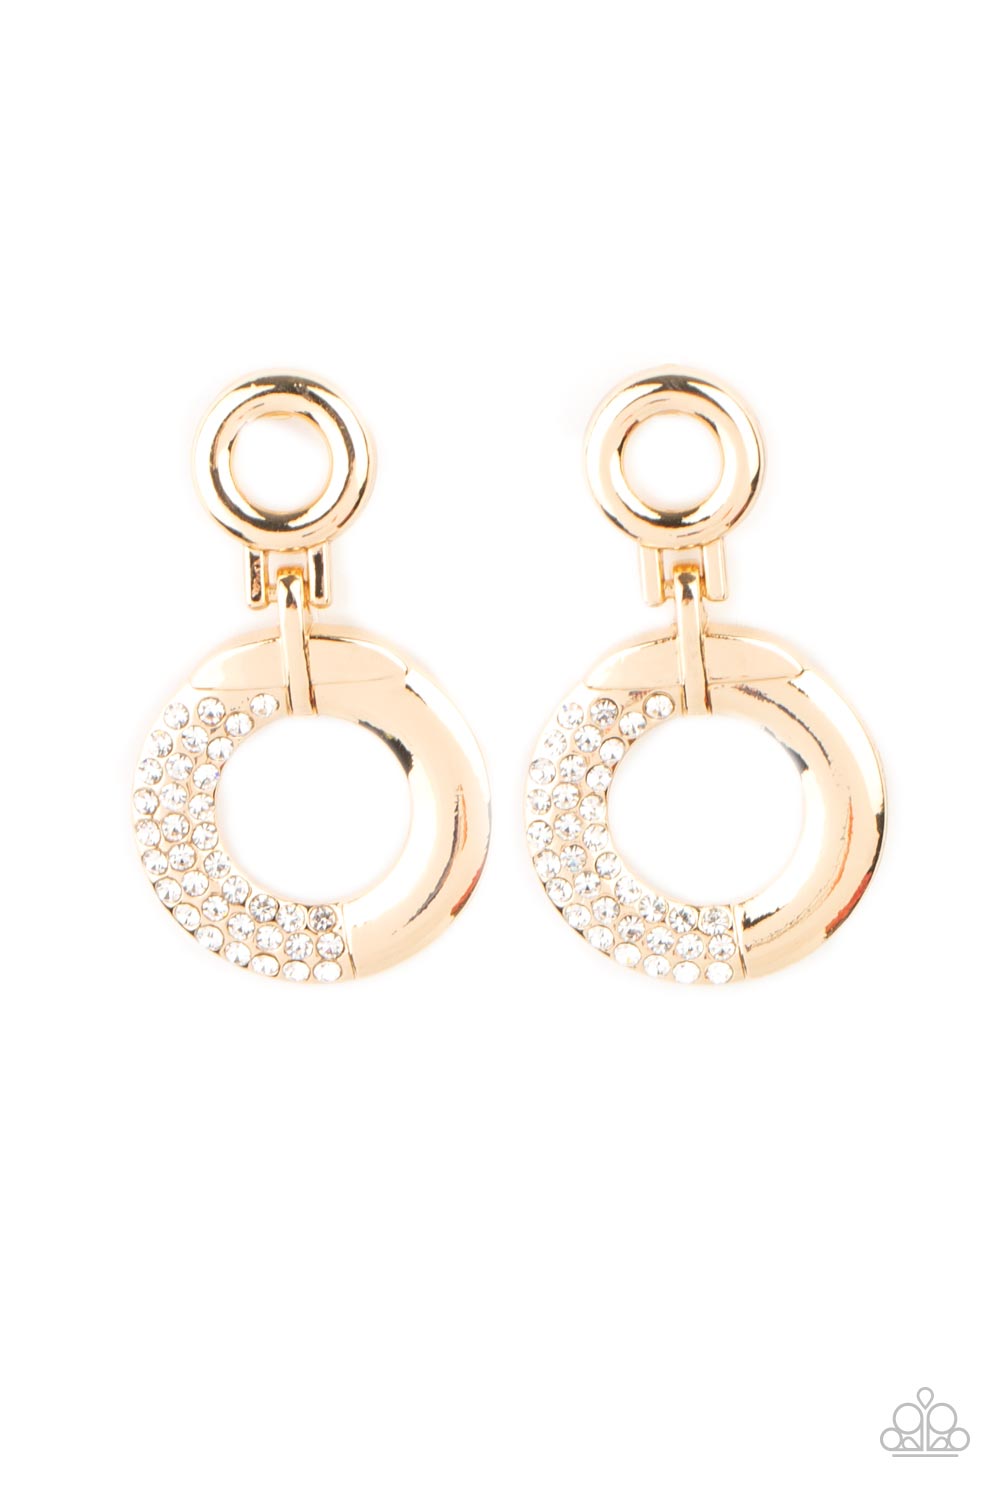 A dainty gold hoop attaches to a shimmery gold ring that is half dipped in glassy white rhinestones, creating a modern look. Earring attaches to a standard post fitting.